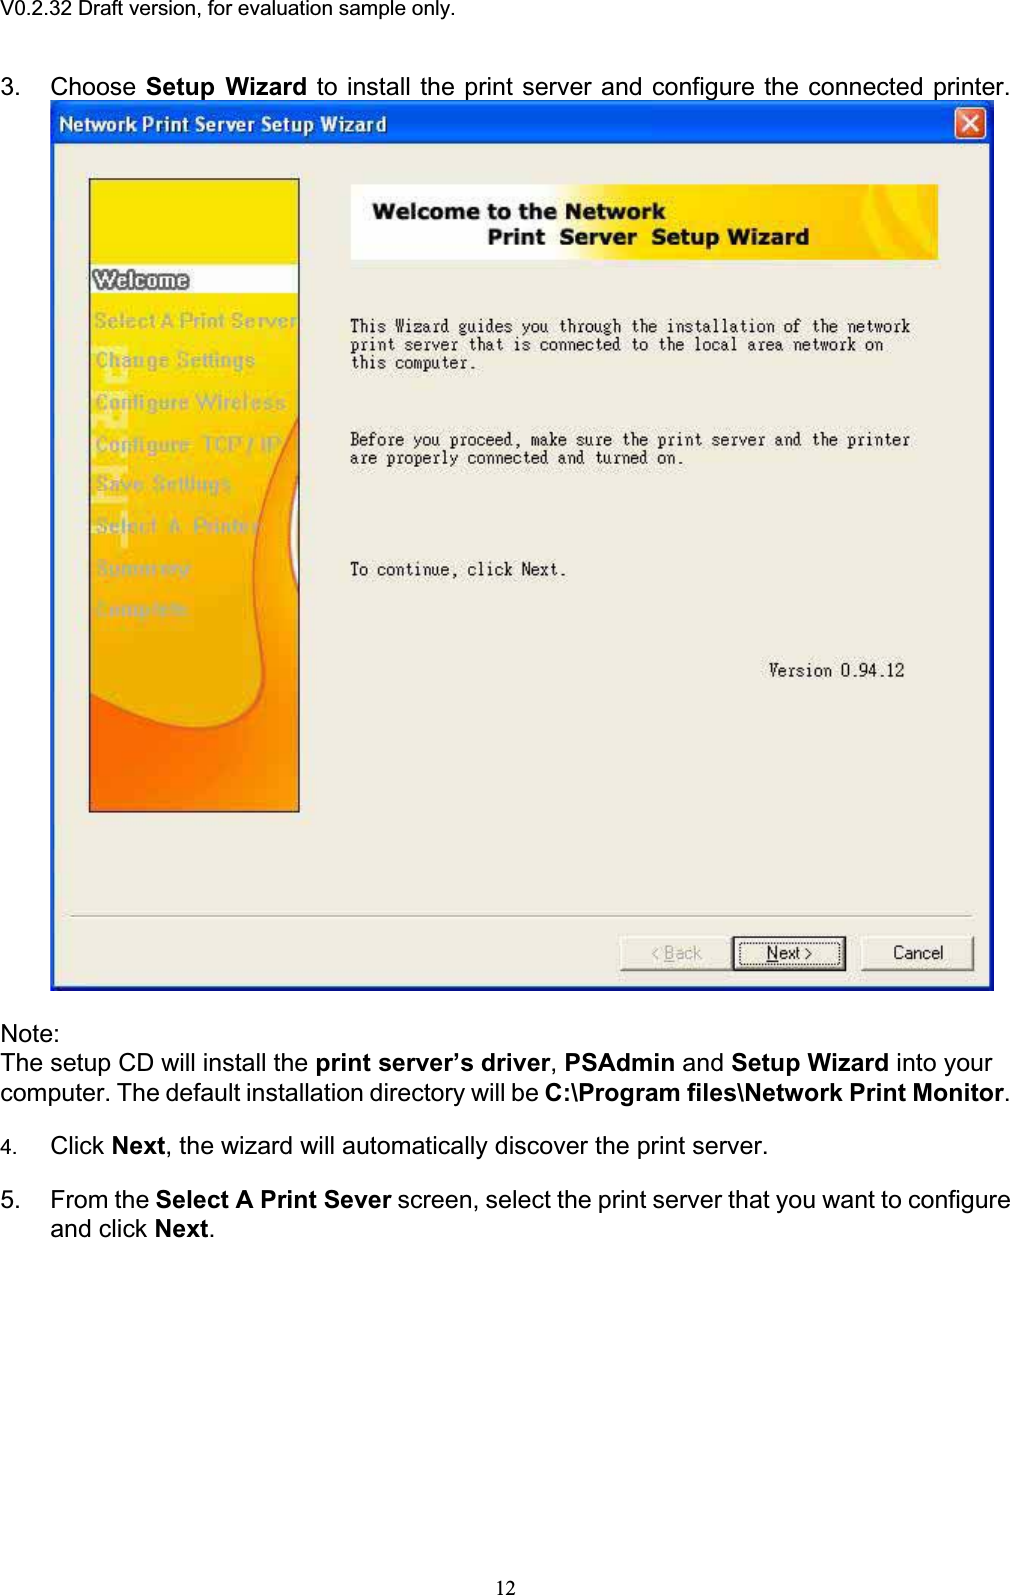 V0.2.32 Draft version, for evaluation sample only.3. Choose Setup Wizard to install the print server and configure the connected printer. Note:The setup CD will install the print server’s driver,PSAdmin and Setup Wizard into your computer. The default installation directory will be C:\Program files\Network Print Monitor.4. Click Next, the wizard will automatically discover the print server. 5. From the Select A Print Sever screen, select the print server that you want to configure and click Next.12